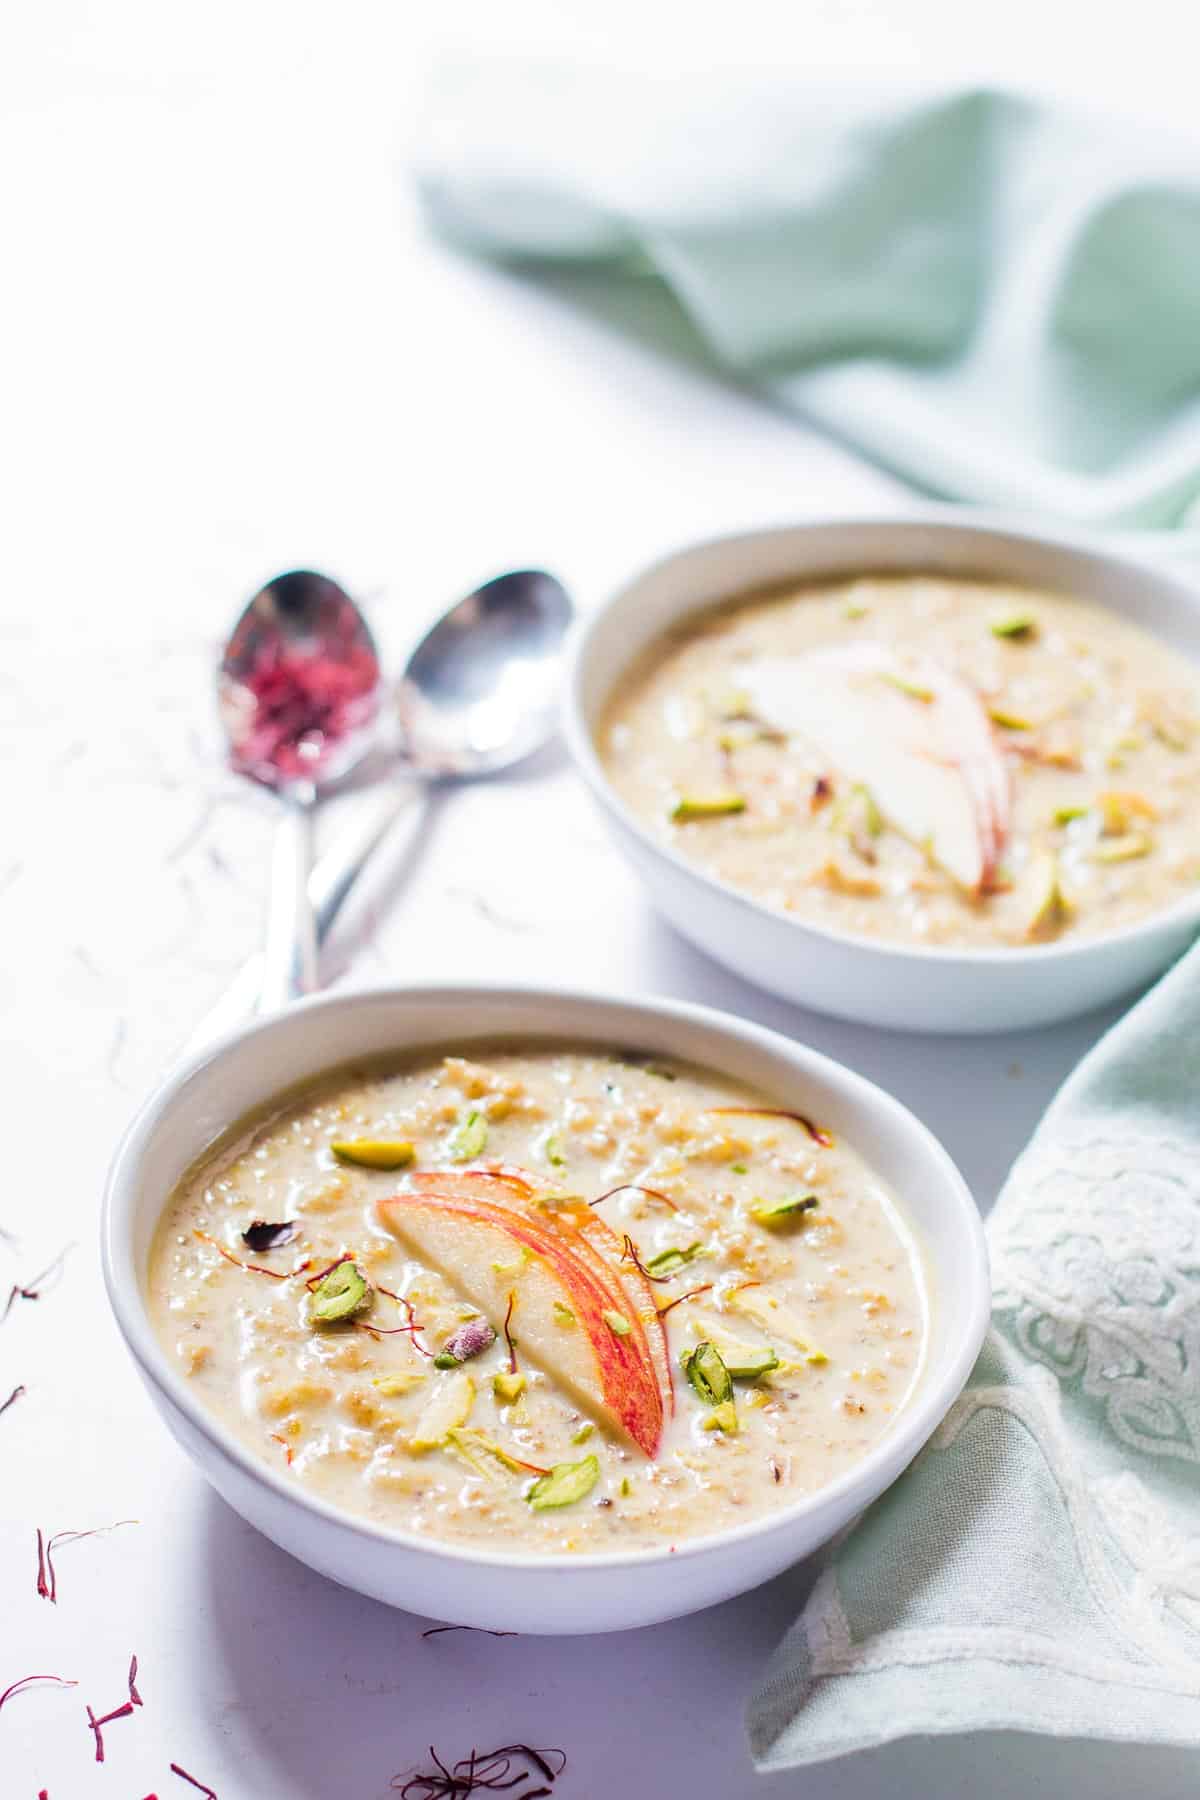 The Healthy Quinoa Apple Kheer topped with apple slices and chopped pistachios.